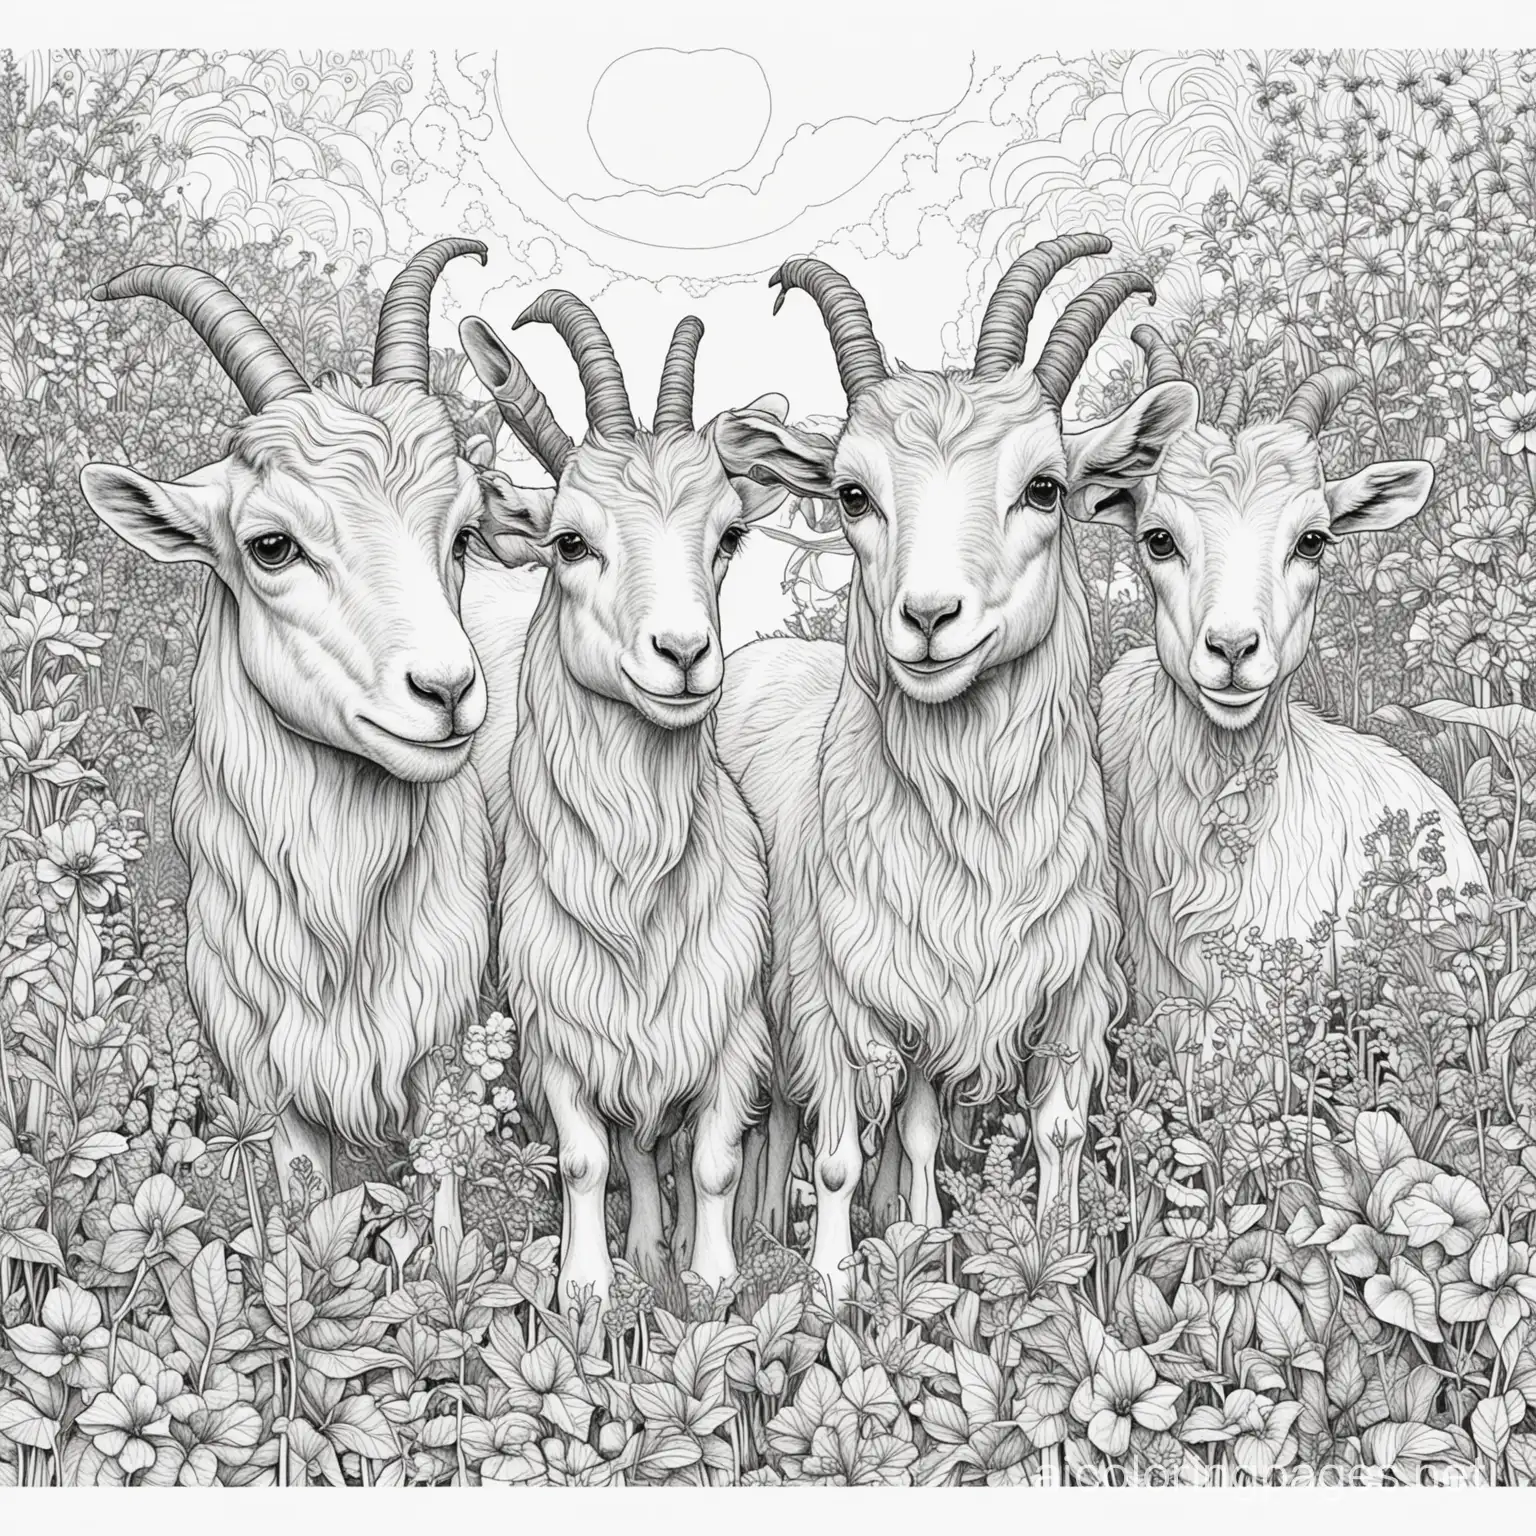 goats high on psychedelics, Coloring Page, black and white, line art, white background, Simplicity, Ample White Space. The background of the coloring page is plain white to make it easy for young children to color within the lines. The outlines of all the subjects are easy to distinguish, making it simple for kids to color without too much difficulty